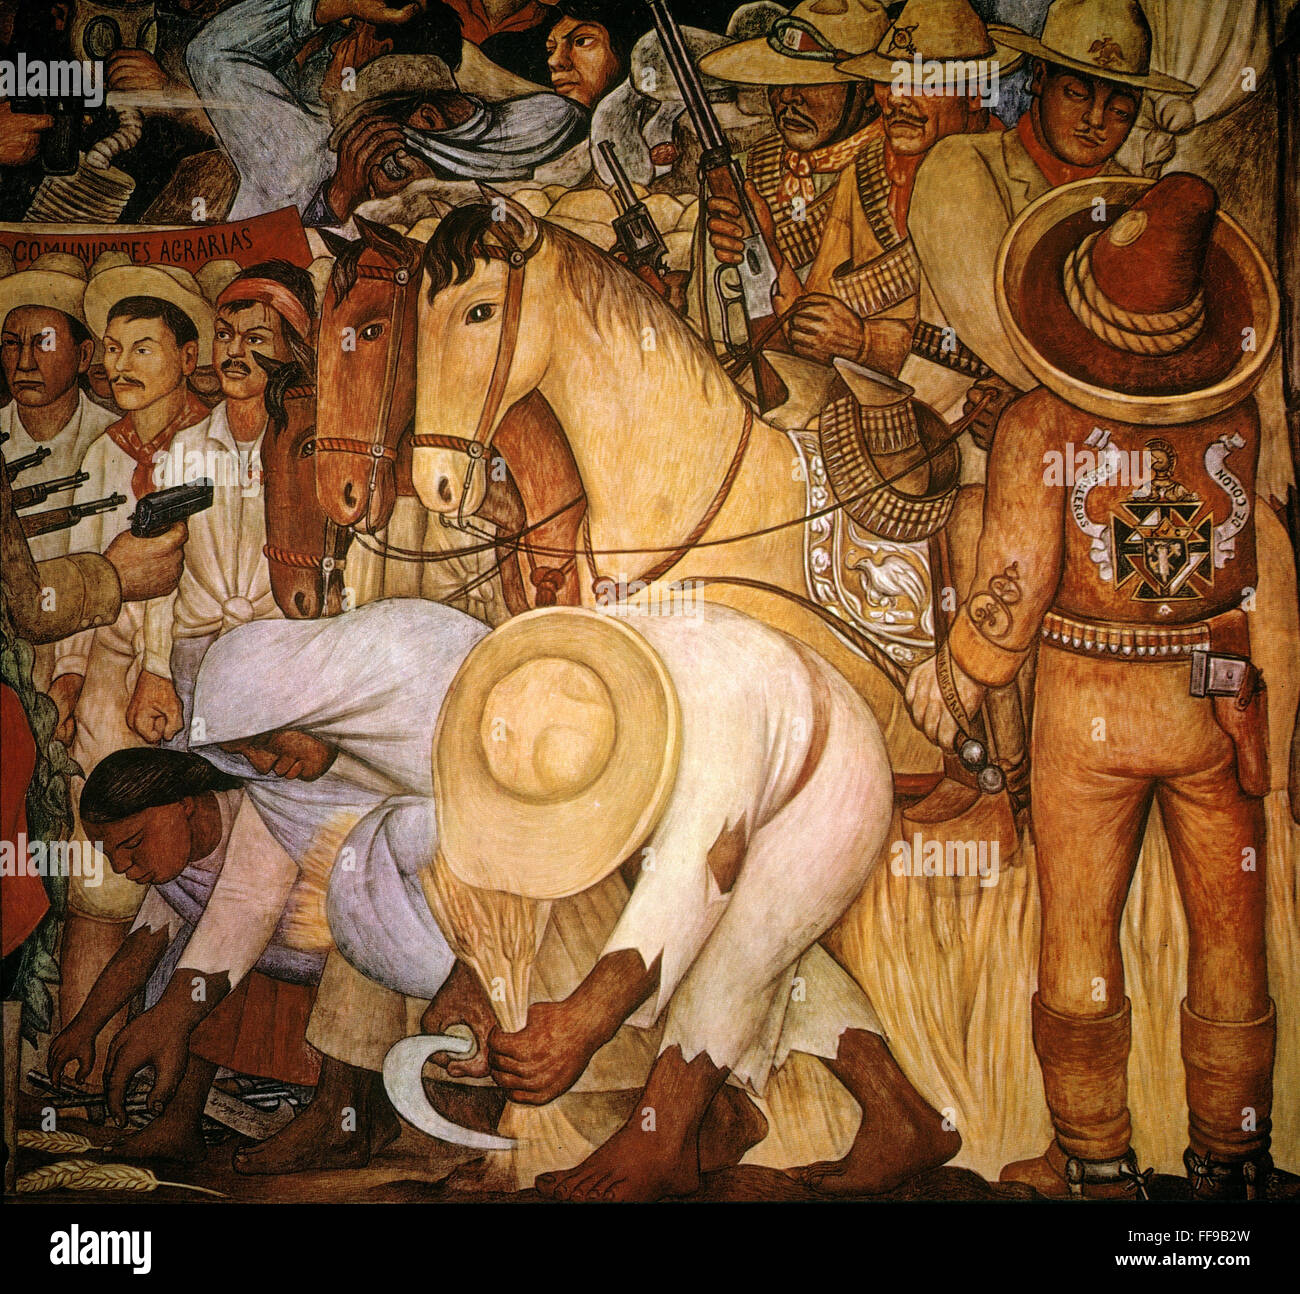 RIVERA: REPRESSION. /nDetail from Diego Rivera's mural painting 'History and Perspective of Mexico' at the National Palace, Mexico City. Stock Photo